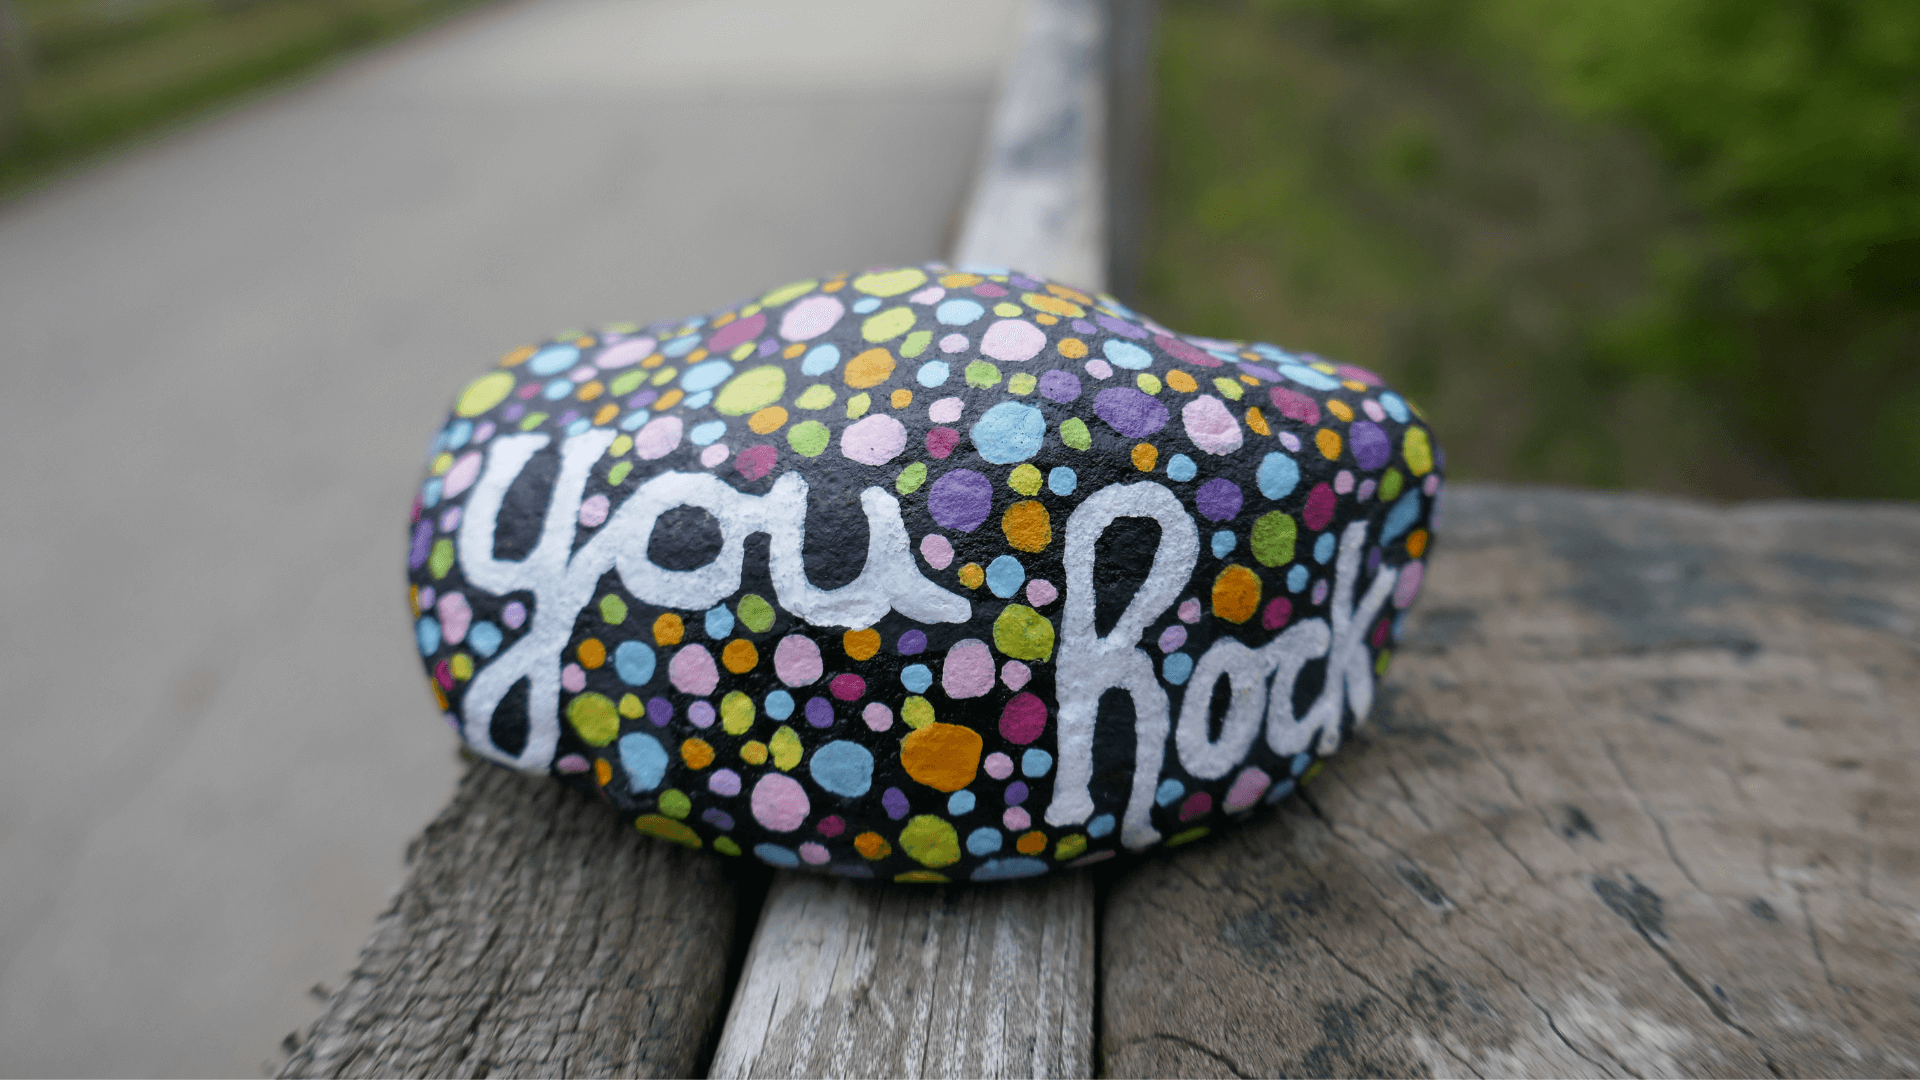 words "You Rock" and colorful dots painted on a small rock